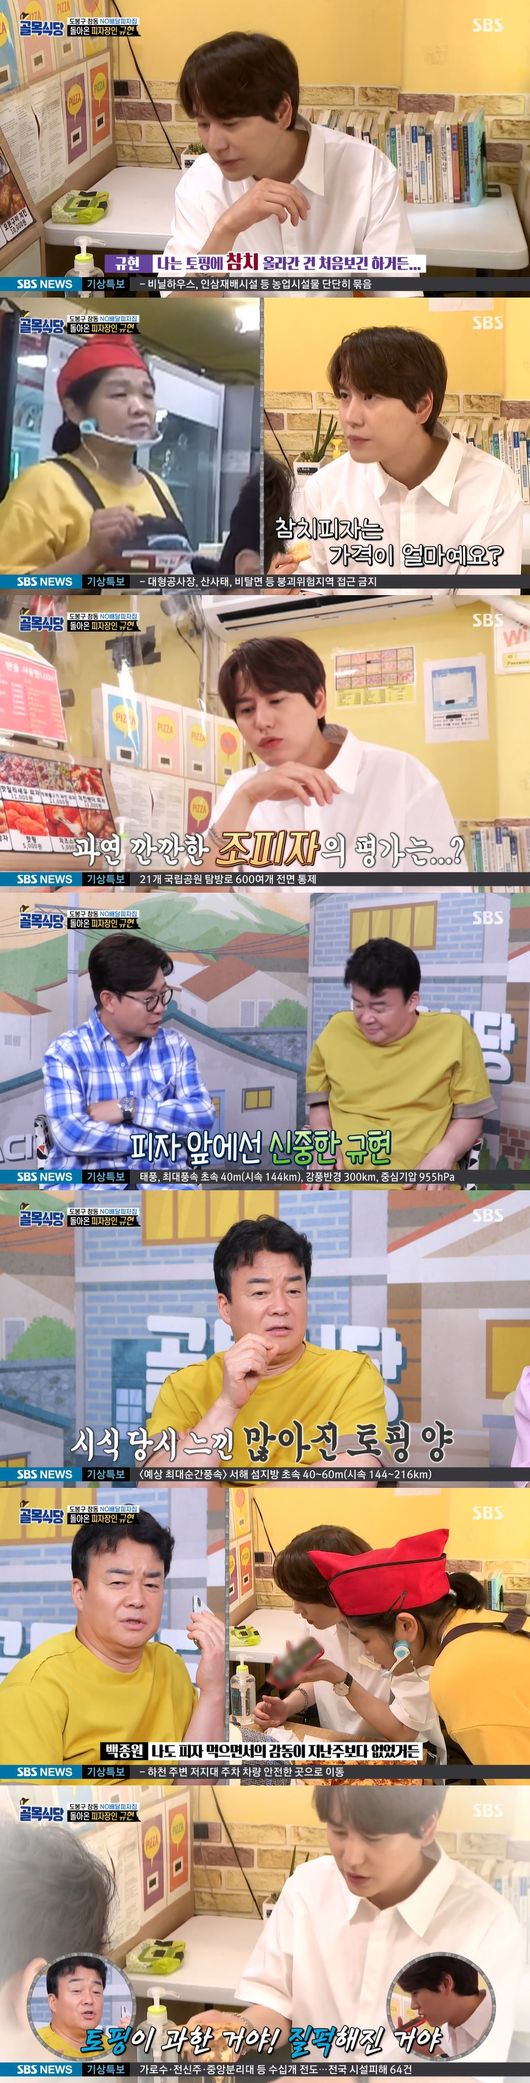 Jung Woo-jin PD, who directs The alley restaurant, expressed his gratitude to guest Lee Seung-gi and Cho Kyuhyun, saying, I have been very helpful to the actual boss because I have been honest with you with my affection.On the morning of the 27th, SBS representative entertainment program Baek Jong-wons The alley restaurant Jung Woo-jin PD said, I was surprised to see Lee Seung-gi calculating cash or evaluating the taste of the chicken gangjeong house president.I think that Seung-ki came to the neighborhood where he lived, and he wanted to help a lot.It was a great help to talk honestly, and I felt that my brother, who succeeded in the neighborhood, looked at his sisters and said, If it was good...On this day, Lee Seung-gi and Super Junior Cho Kyuhyun also appeared as guests.Jung Woo-jin PD said, I was embarrassed by the behind-the-scenes of Cho Kyuhyun. Mr. Baek said, I tried to schedule it because I was in the company.(Laughing) Mr. Baek cares a lot about Mr. Cho Kyuhyun and the two of you are close, he said.In addition, Jung Woo-jin PD said, Cho Kyuhyun is very sensitive to Palate.After the recording, I said, I was surprised that the amount of topping changed, but it was dramatically different. In fact, there were several events called pizza in The ally restaurant. I also learn new programs every time for nearly three years.Cho Kyuhyun catches the taste, Mr. Baek analyzes the improvements, and these things help. In the SBS entertainment Baek Jong-wons The alley restaurant broadcasted on the 26th, the Chang-dong alley of Dobong-gu was drawn.Baek Jong-won found a chicken gangjeong house, and Lee Seung-gi appeared in surprise.Baek Jong-won asked for feedback as he raised the flag of the two grassy bosses, who arrived at the chicken gangjeong house and asked me carefully from the target group when I asked for prickly advice and affectionate advice.Lee Seung-gi, who was come to see the size and fry coating, relaxed the bosses with praise, admiring everyone with a genuine Maseong talk skill.Lee Seung-gi said: Its an honor to be able to develop together.Once you accept the opinion of Mr. Baek Jong-won, make your own idea. He expressed his encouragement with a warm heart and heart like his senior and local brother.You do not have to give me change, it is broadcasting, so you give more.Buy more ingredients and practice more. He left a commemorative photo with Chang-dong Brothers.Later, Baek Jong-won visited the NO delivery pizza house again: Jo Pizza Cho Kyuhyun made a comeback as a pizza artisan, and decided to taste the new menu, tuna pizza and salami pizza.In half-expected curiosity, Cho Kyuhyun approached the kitchen and studied how to make pizza.First, I sampled tuna pizza. Cho Kyuhyun said that toppings are new and I do not think it is an impressionable taste.As it turns out, toppings have been more than before, and Cho Kyuhyun made pizza again, and Baek Jong-won, who found the balance of taste magically with appropriate toppings, agreed that the balance of topping amount and topping harmony are important, and said, So a third party should come and eat.Baek Jong-wons The Alley Restaurant broadcast screen capture